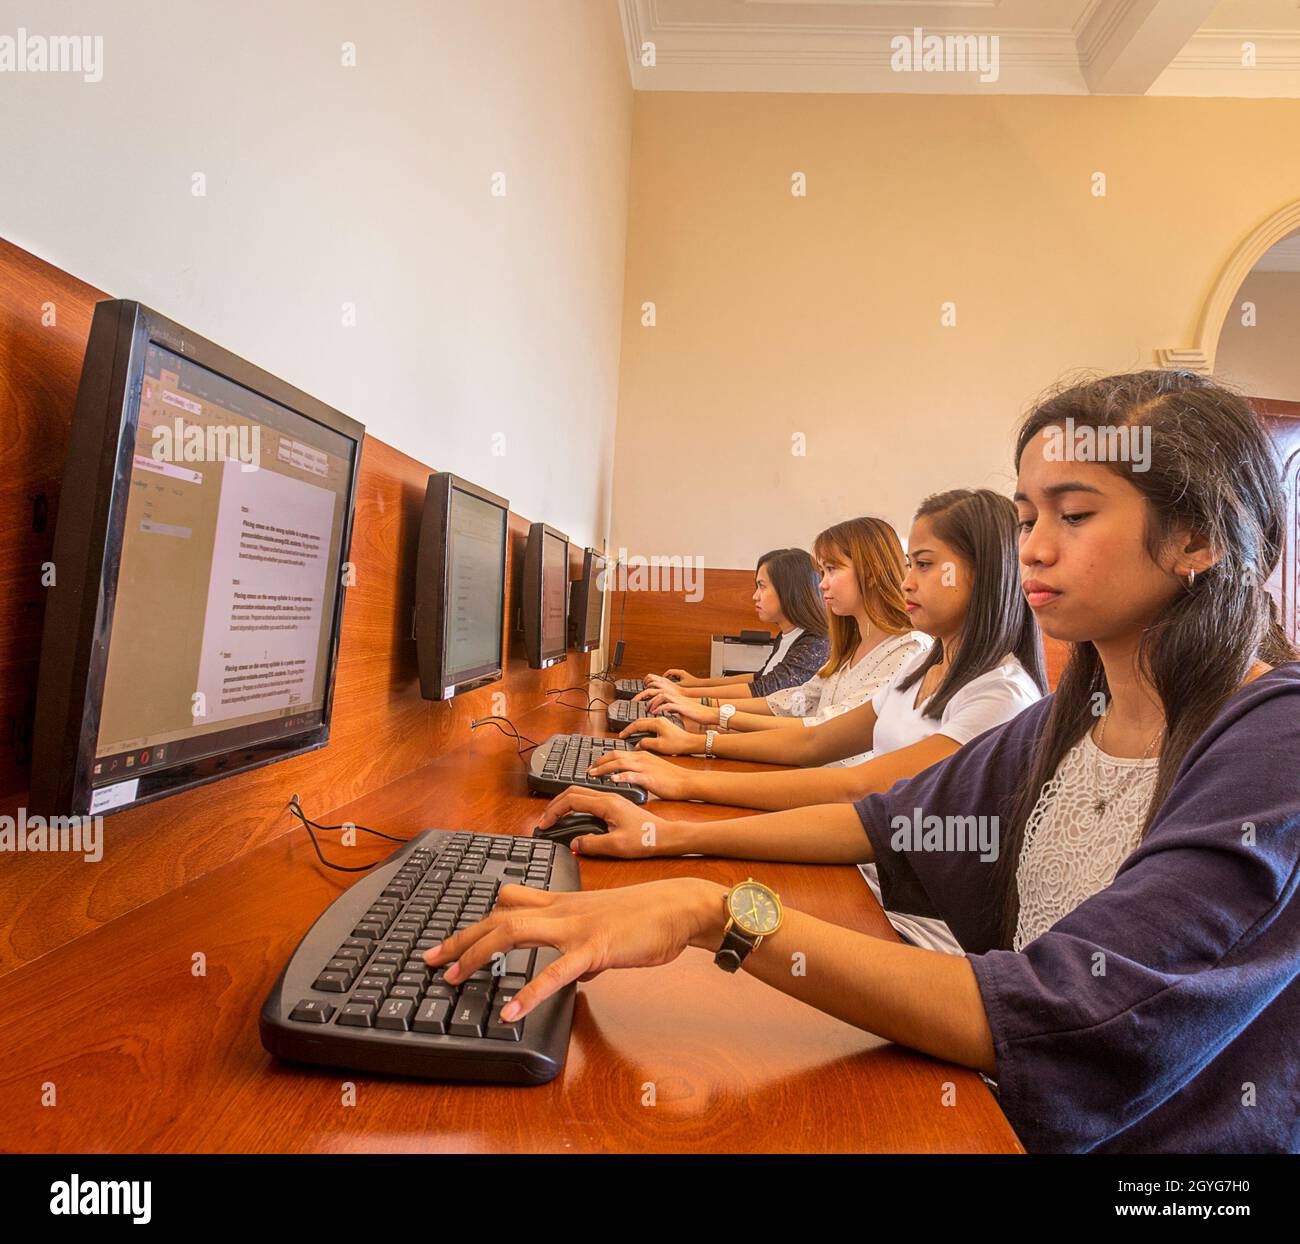 Long desk with computer monitors and students reading the screen using keyboards. Stock Photo